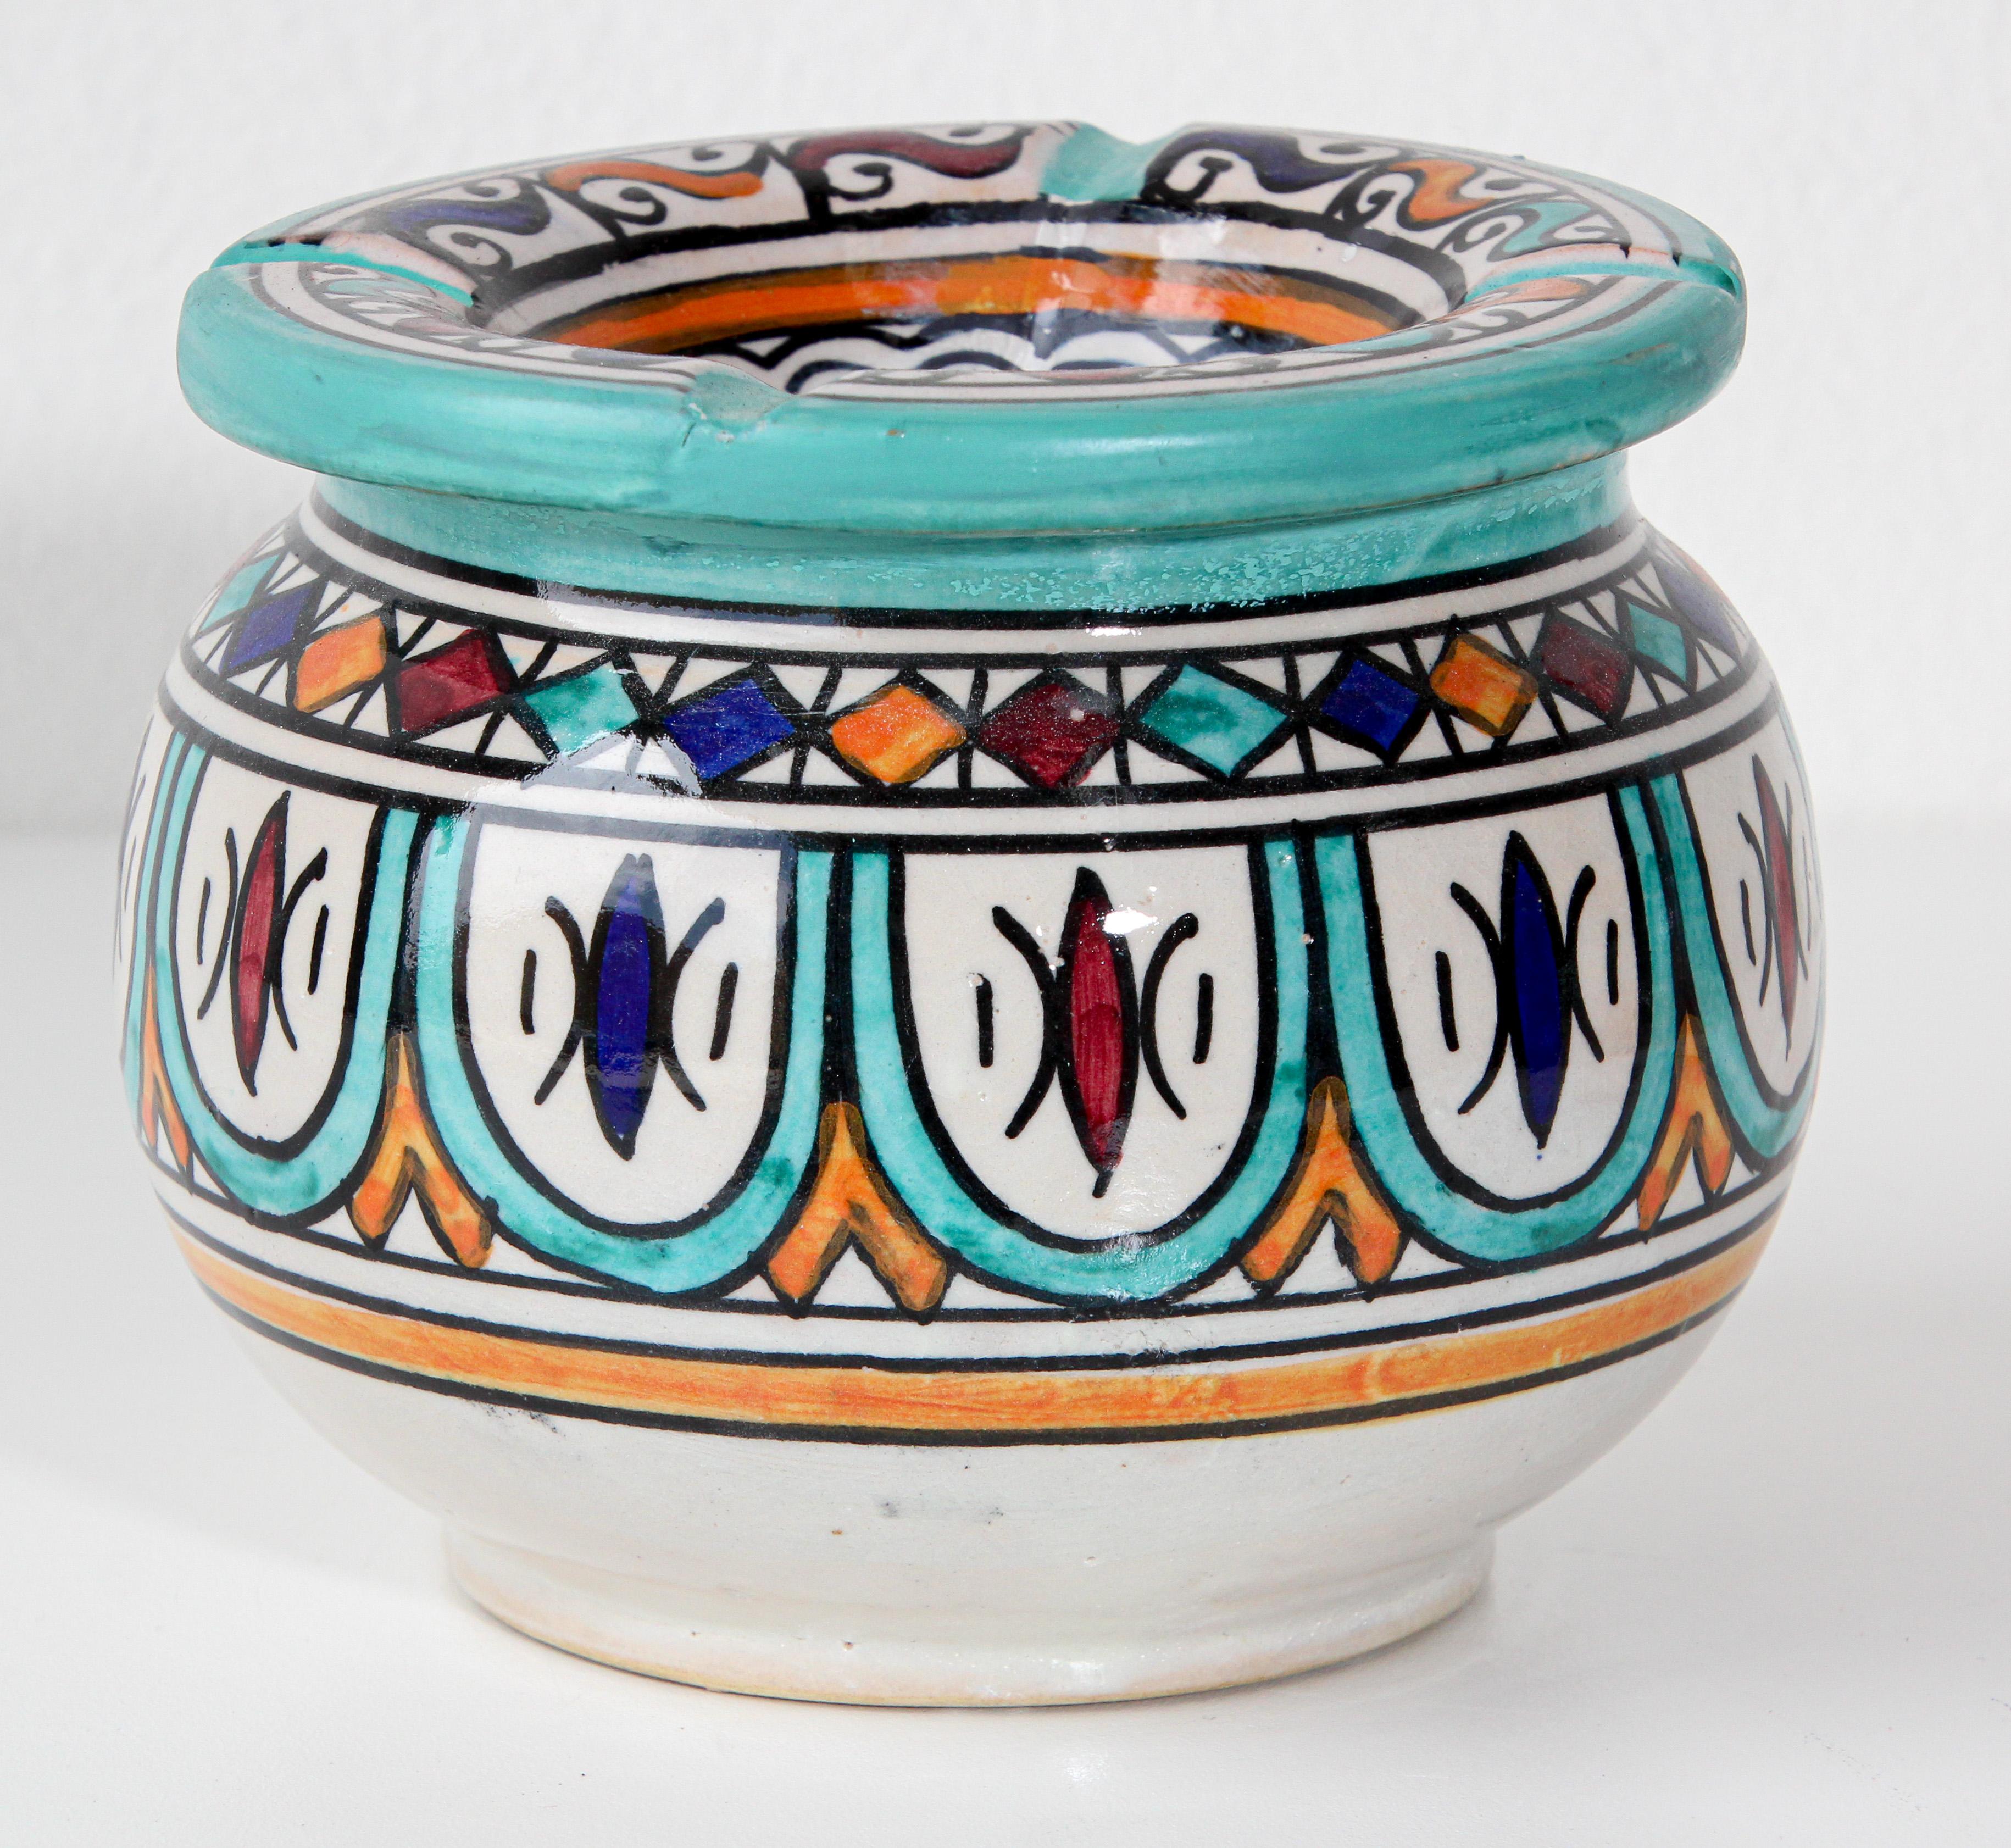 Moroccan covered hand painted ceramic ashtray.
Handcrafted Moroccan ceramic covered ash receiver.
This covered ashtray could be used indoor and outdoor.
If used indoor the cover will keep the smell of ashes in.
hand painted with Moorish designs